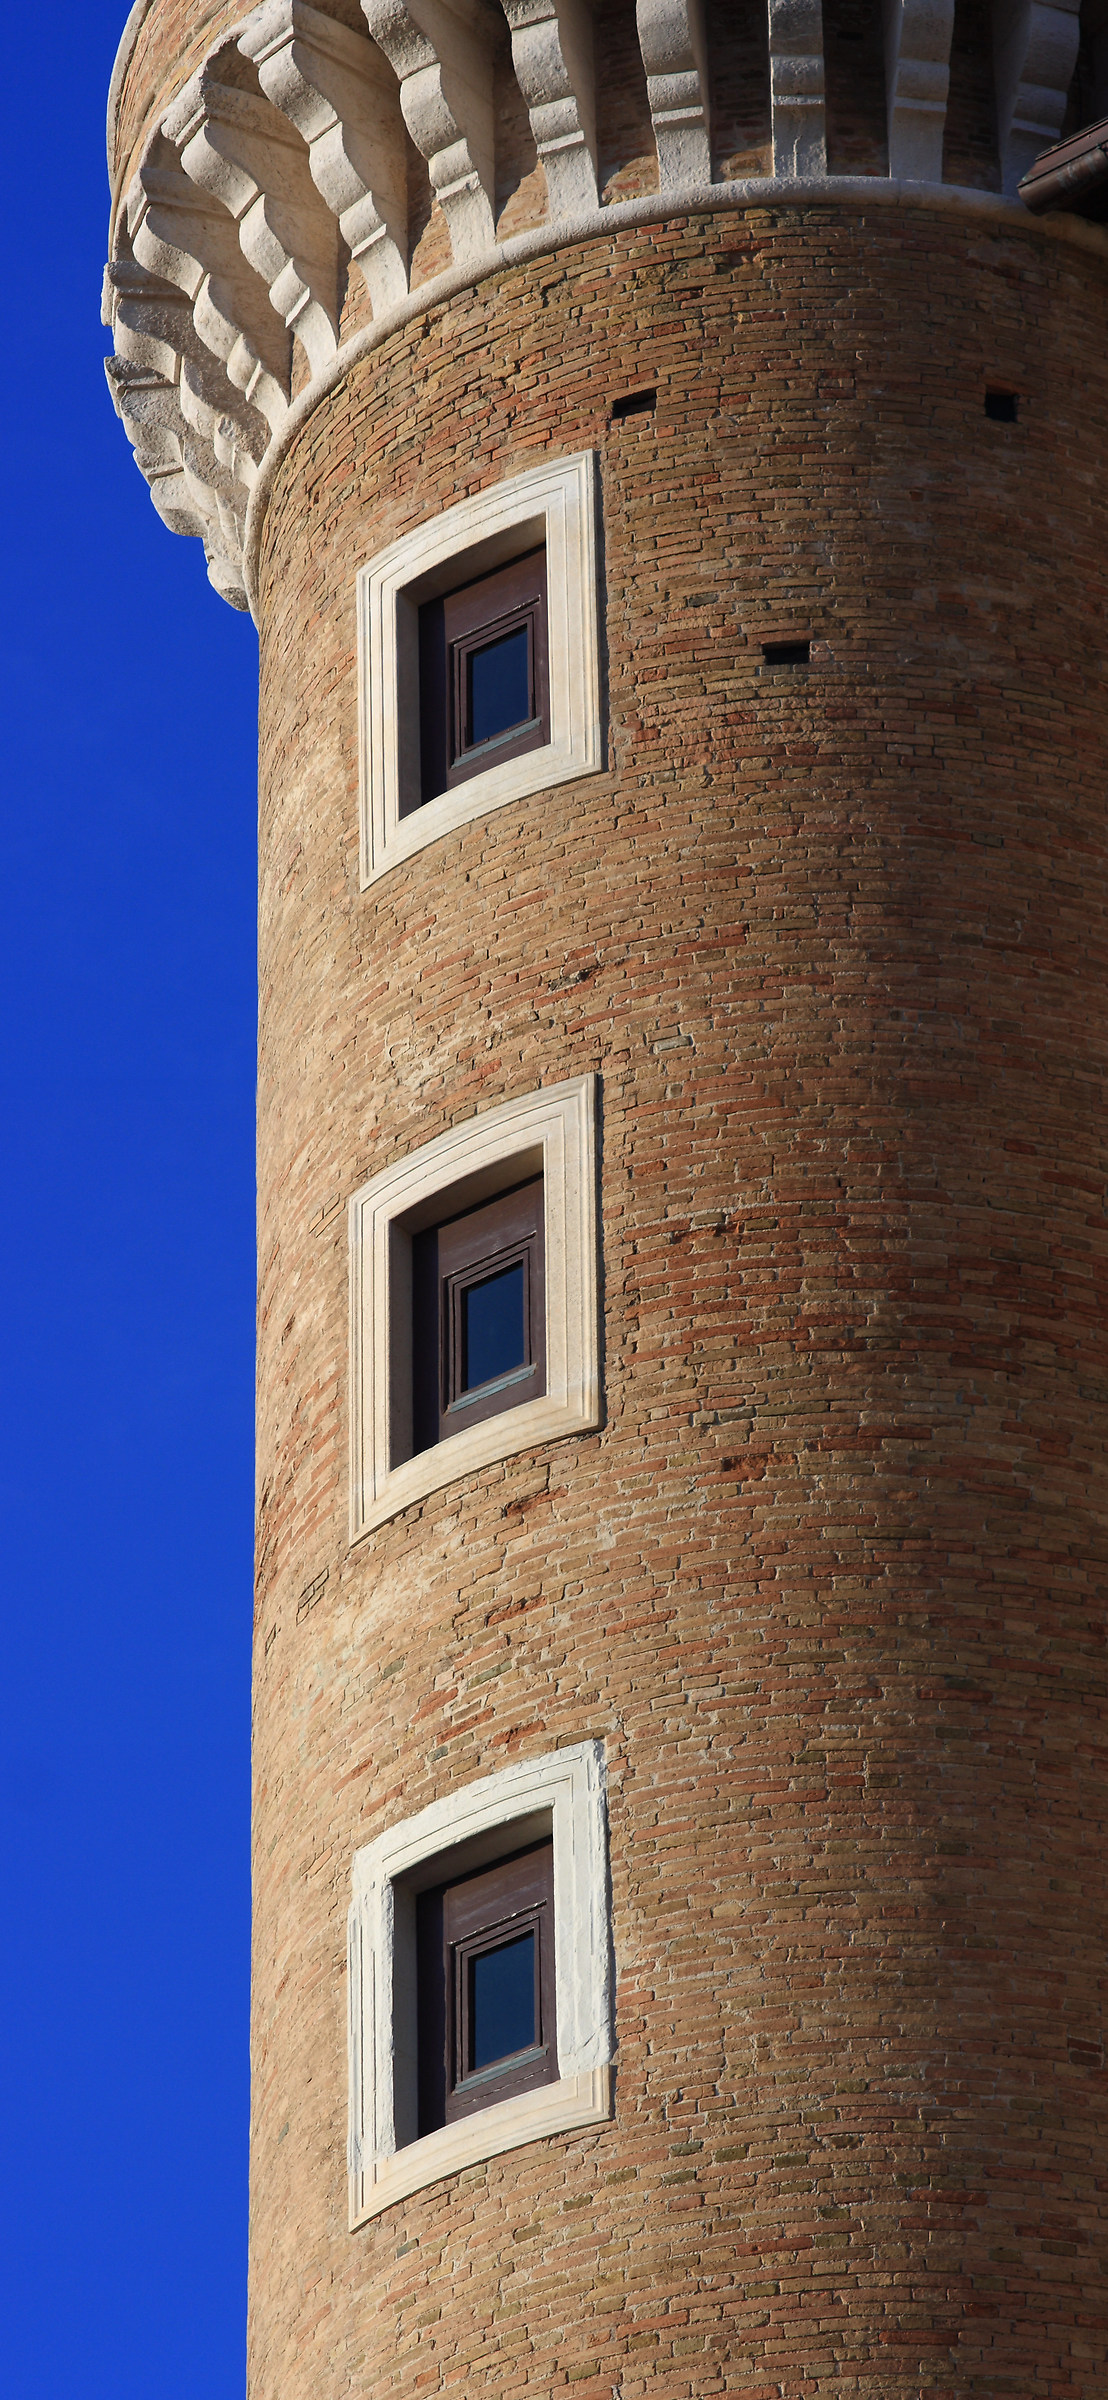 The Tower, detail...